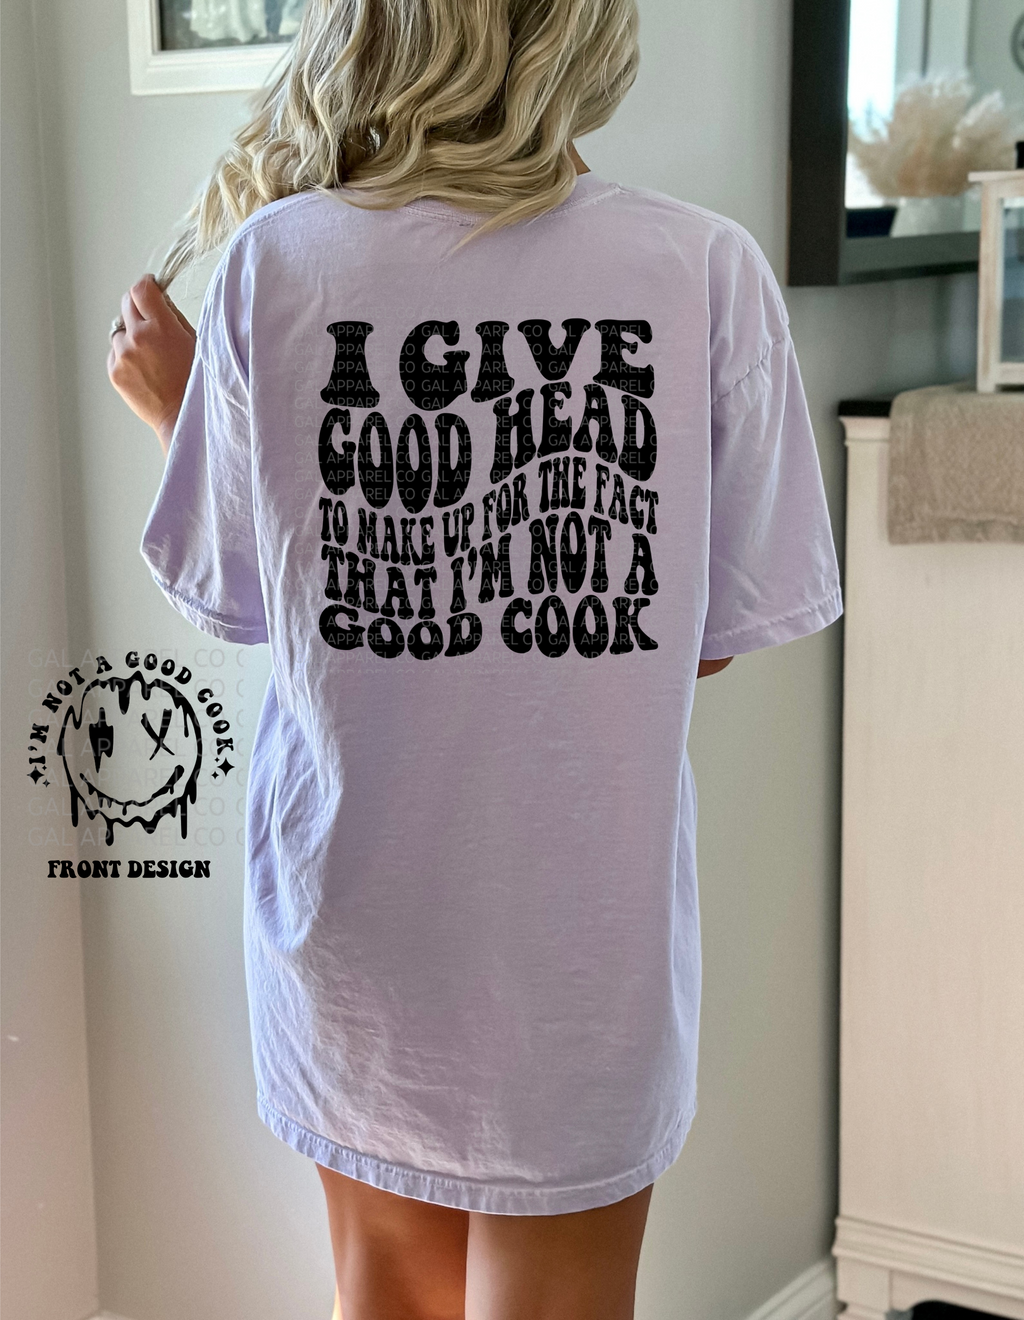 I give good head to make up for the fact I am not a good cookComfort colors tee